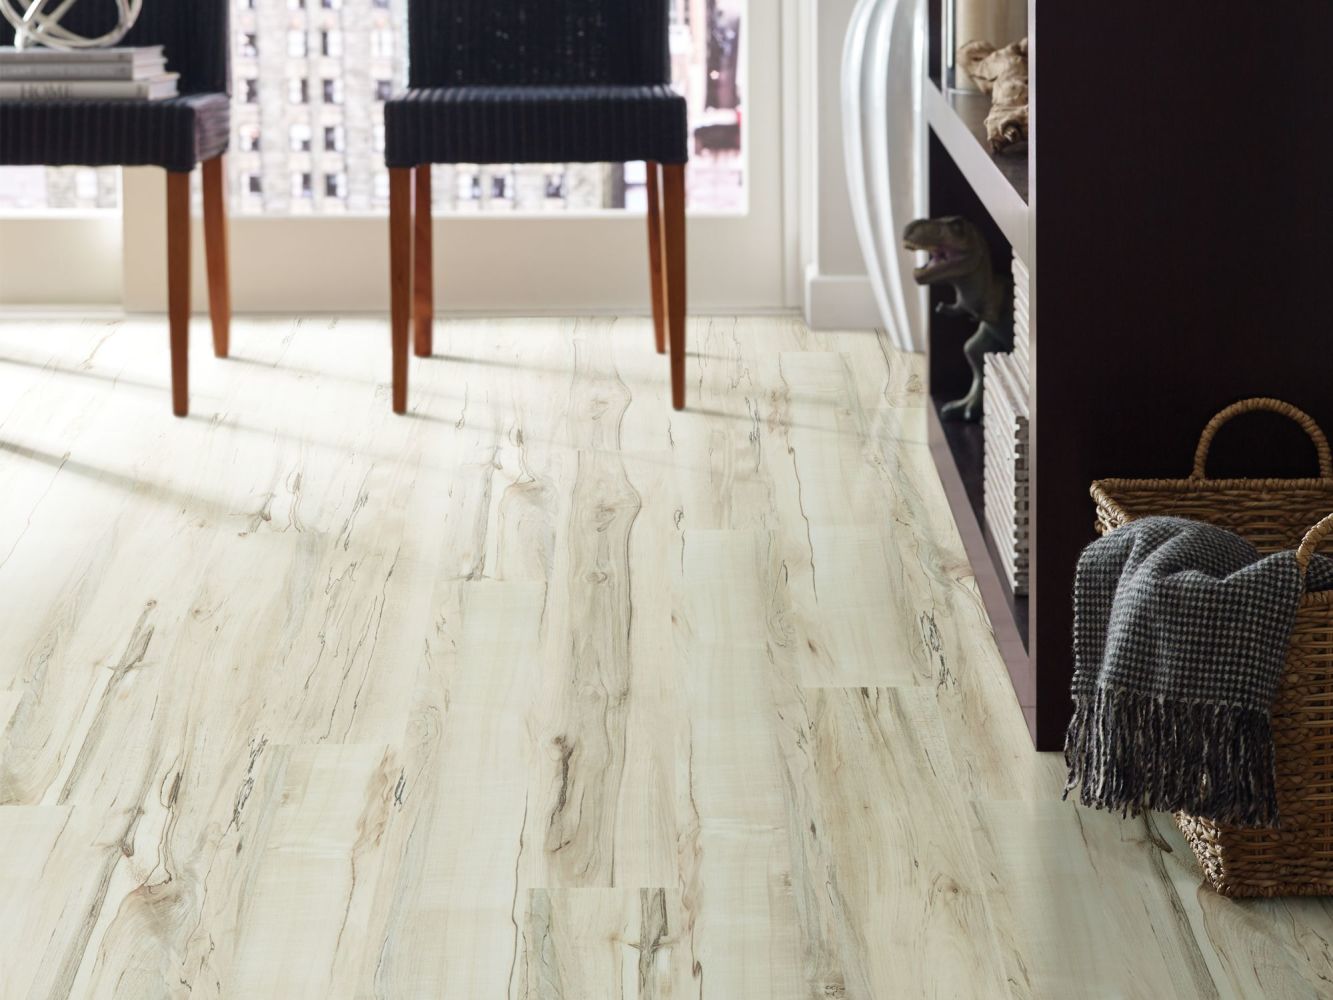 Shaw Floors Resilient Property Solutions Elan Plank Mineral Maple 00297_VE388